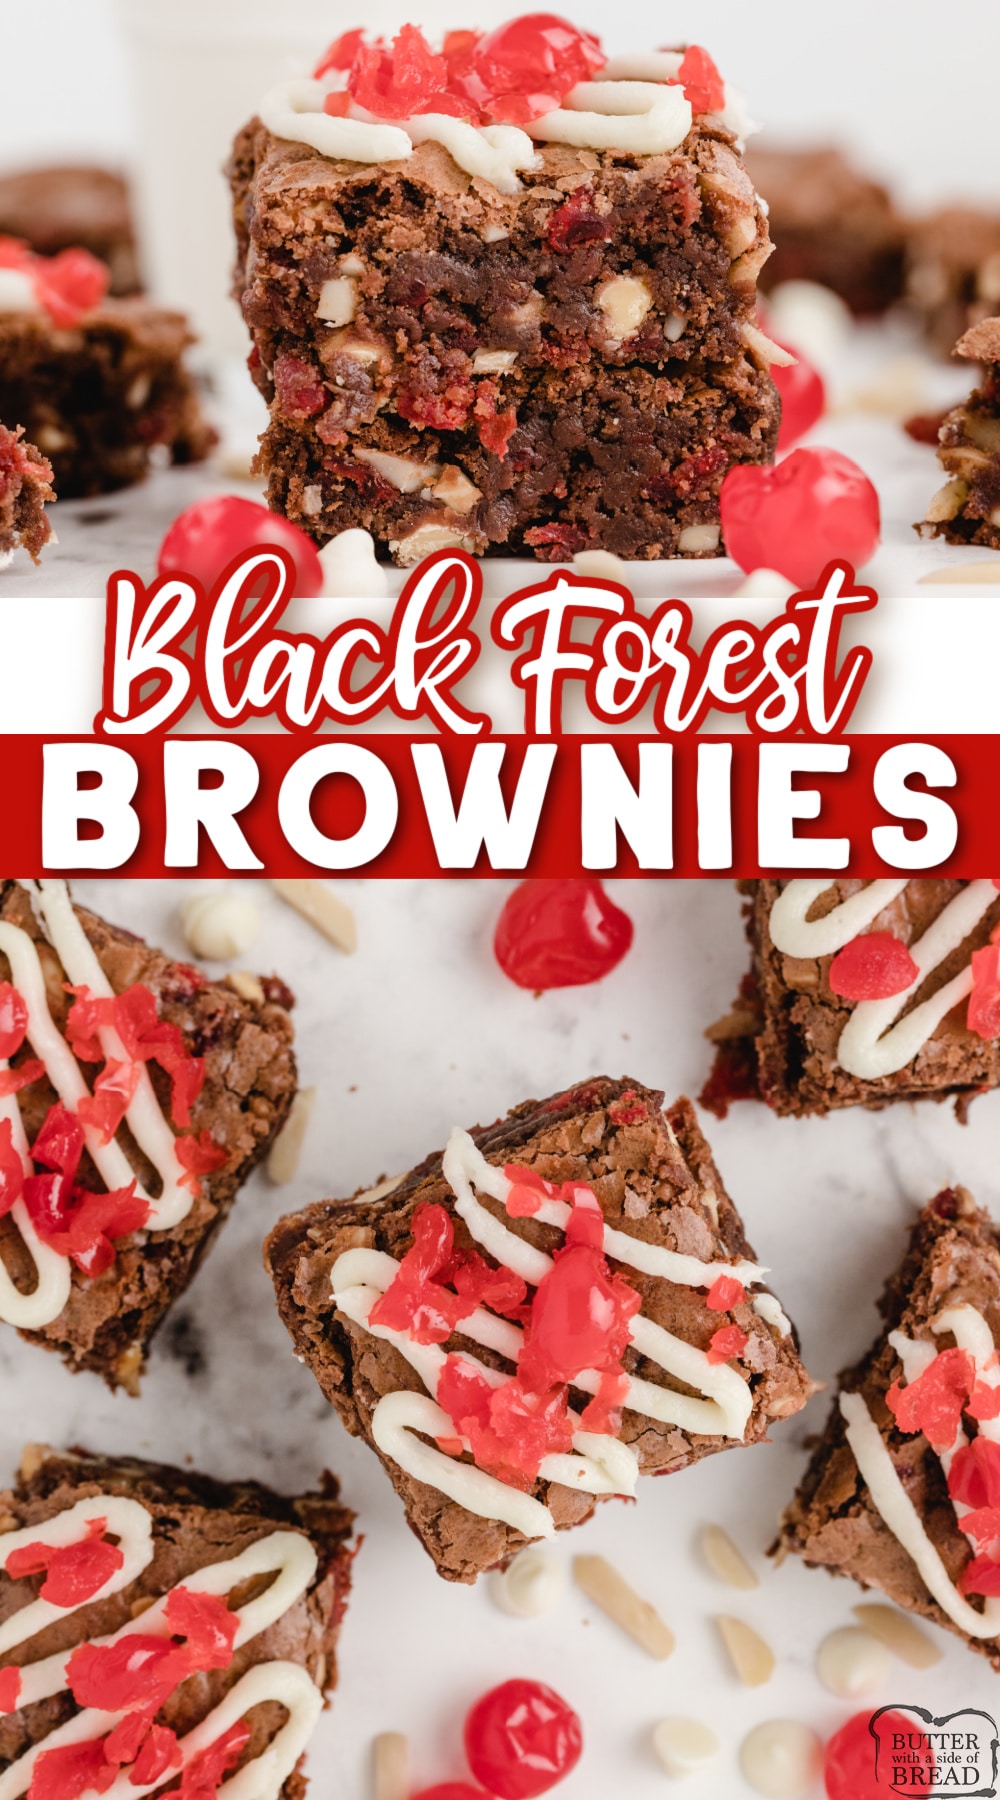 Black Forest Brownies are made with a delicious, from-scratch brownie recipe, that is mixed with white chocolate chips, chopped cherries and slivered almonds. These chocolate cherry brownies are then topped with a sensational cream cheese frosting and even more delicious cherries!